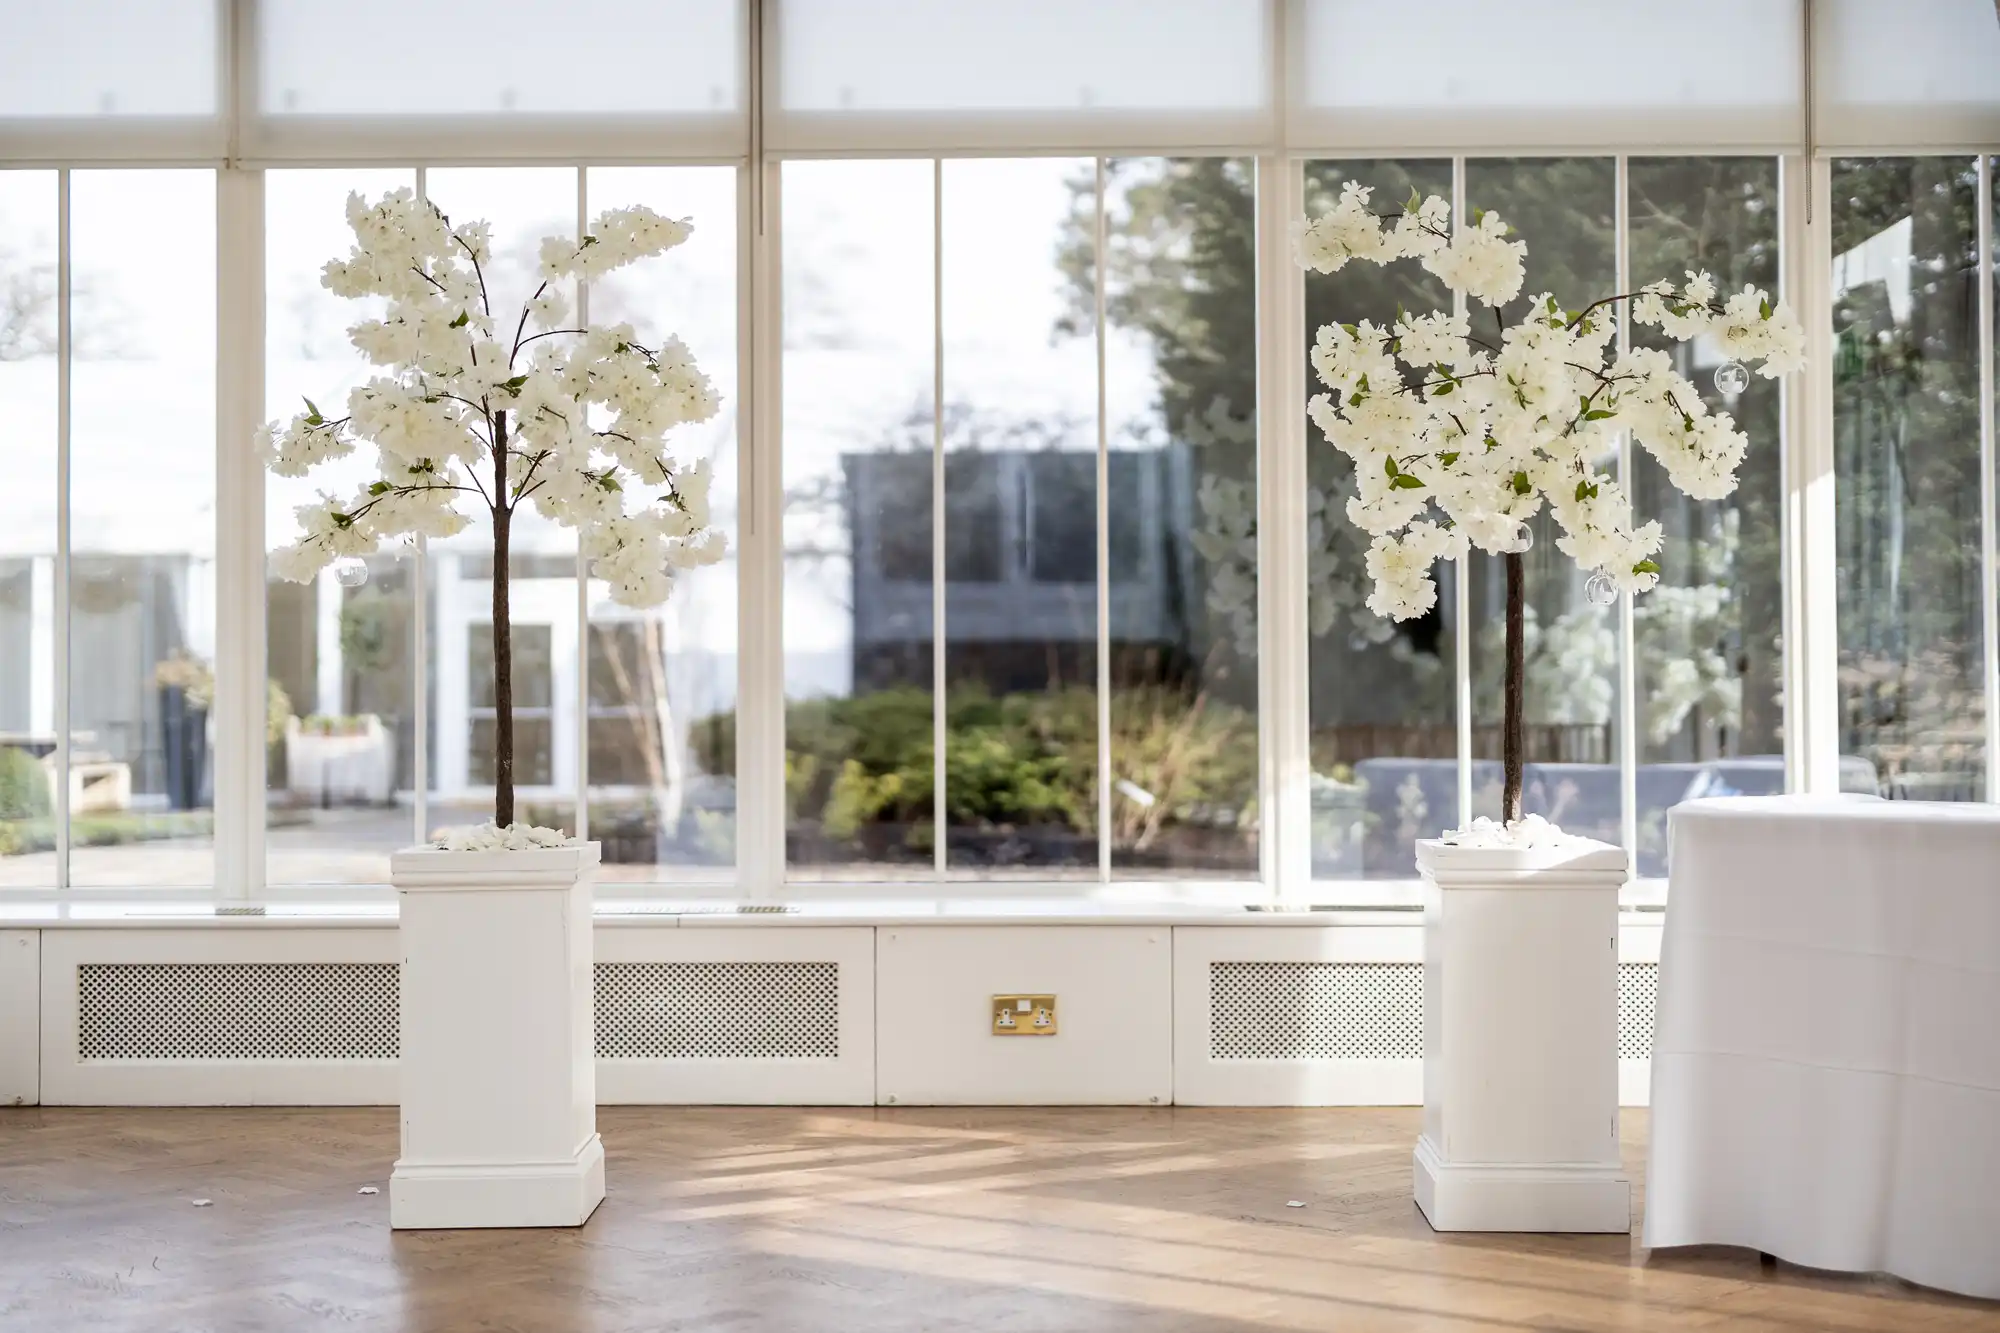 A spacious room with large windows and natural light features two potted artificial white blossom trees on white pedestals, and a round table on the right.